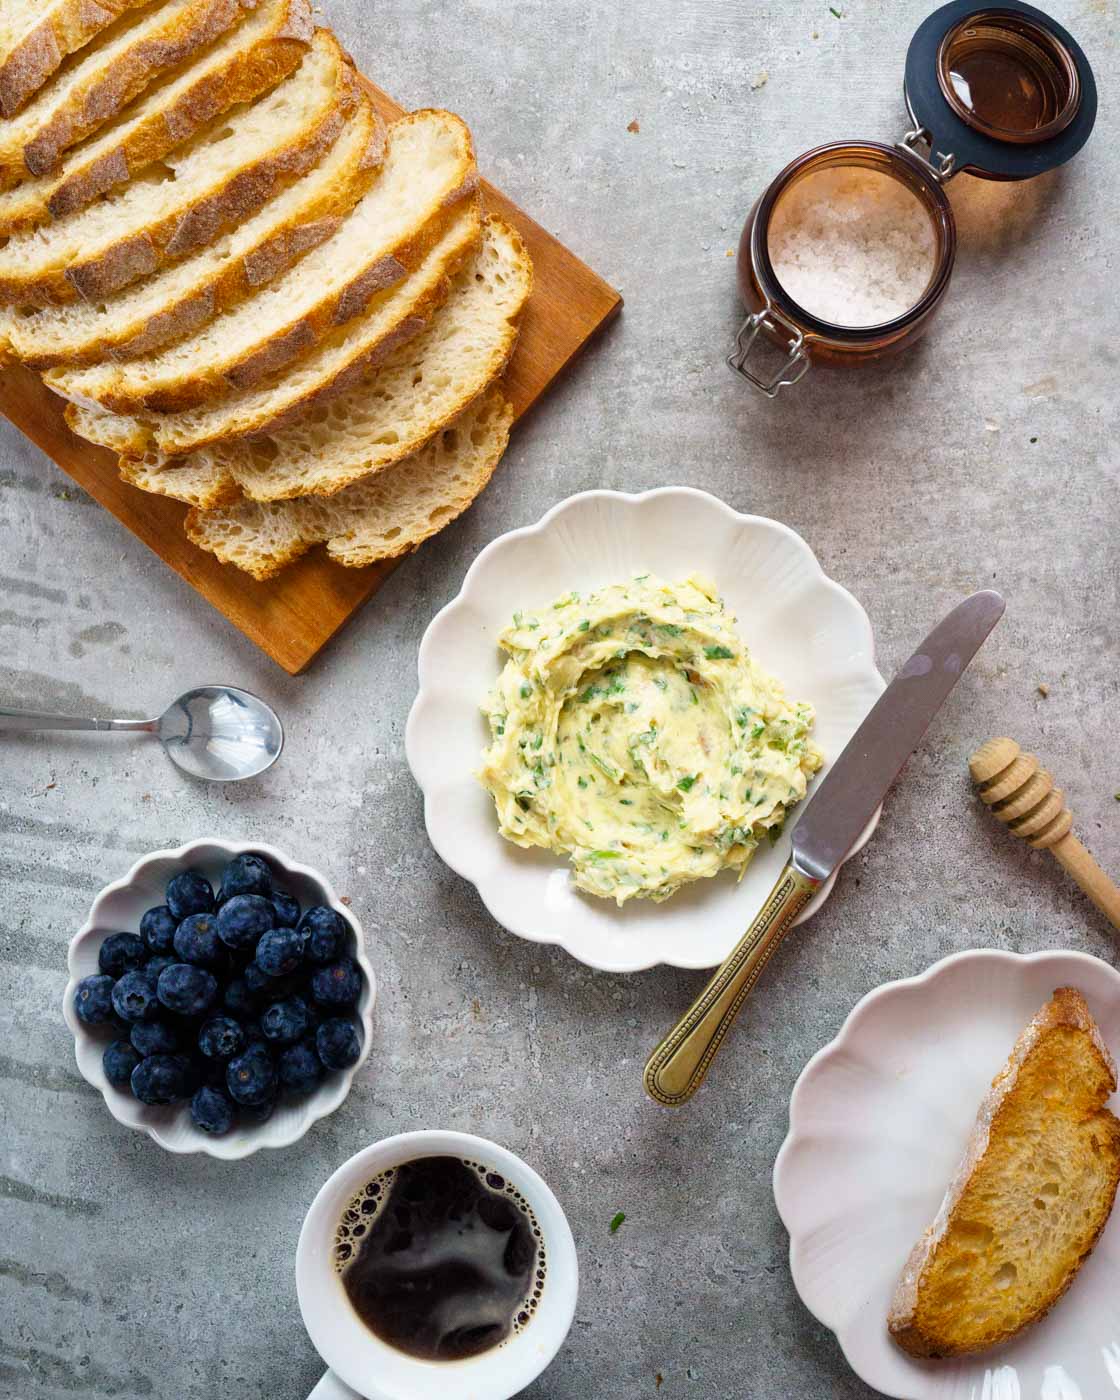 Breakfast spread on the table with sour dough bread, coffee, blueberries ,roasted garlic compound butter and a cup of coffee